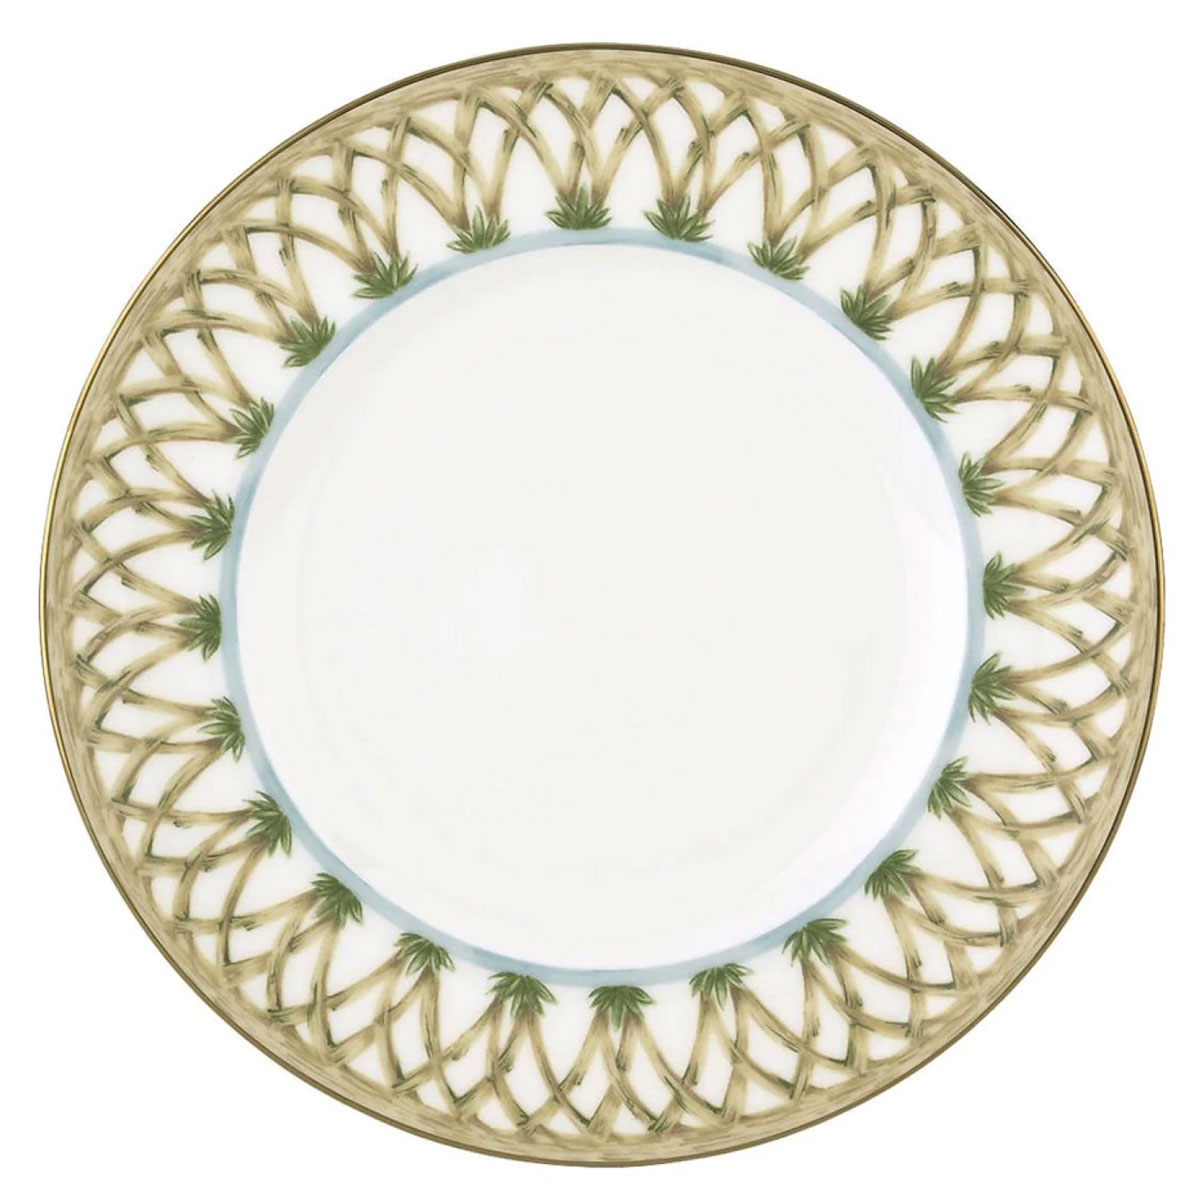 Lenox British Colonial Bamboo Accent Plate